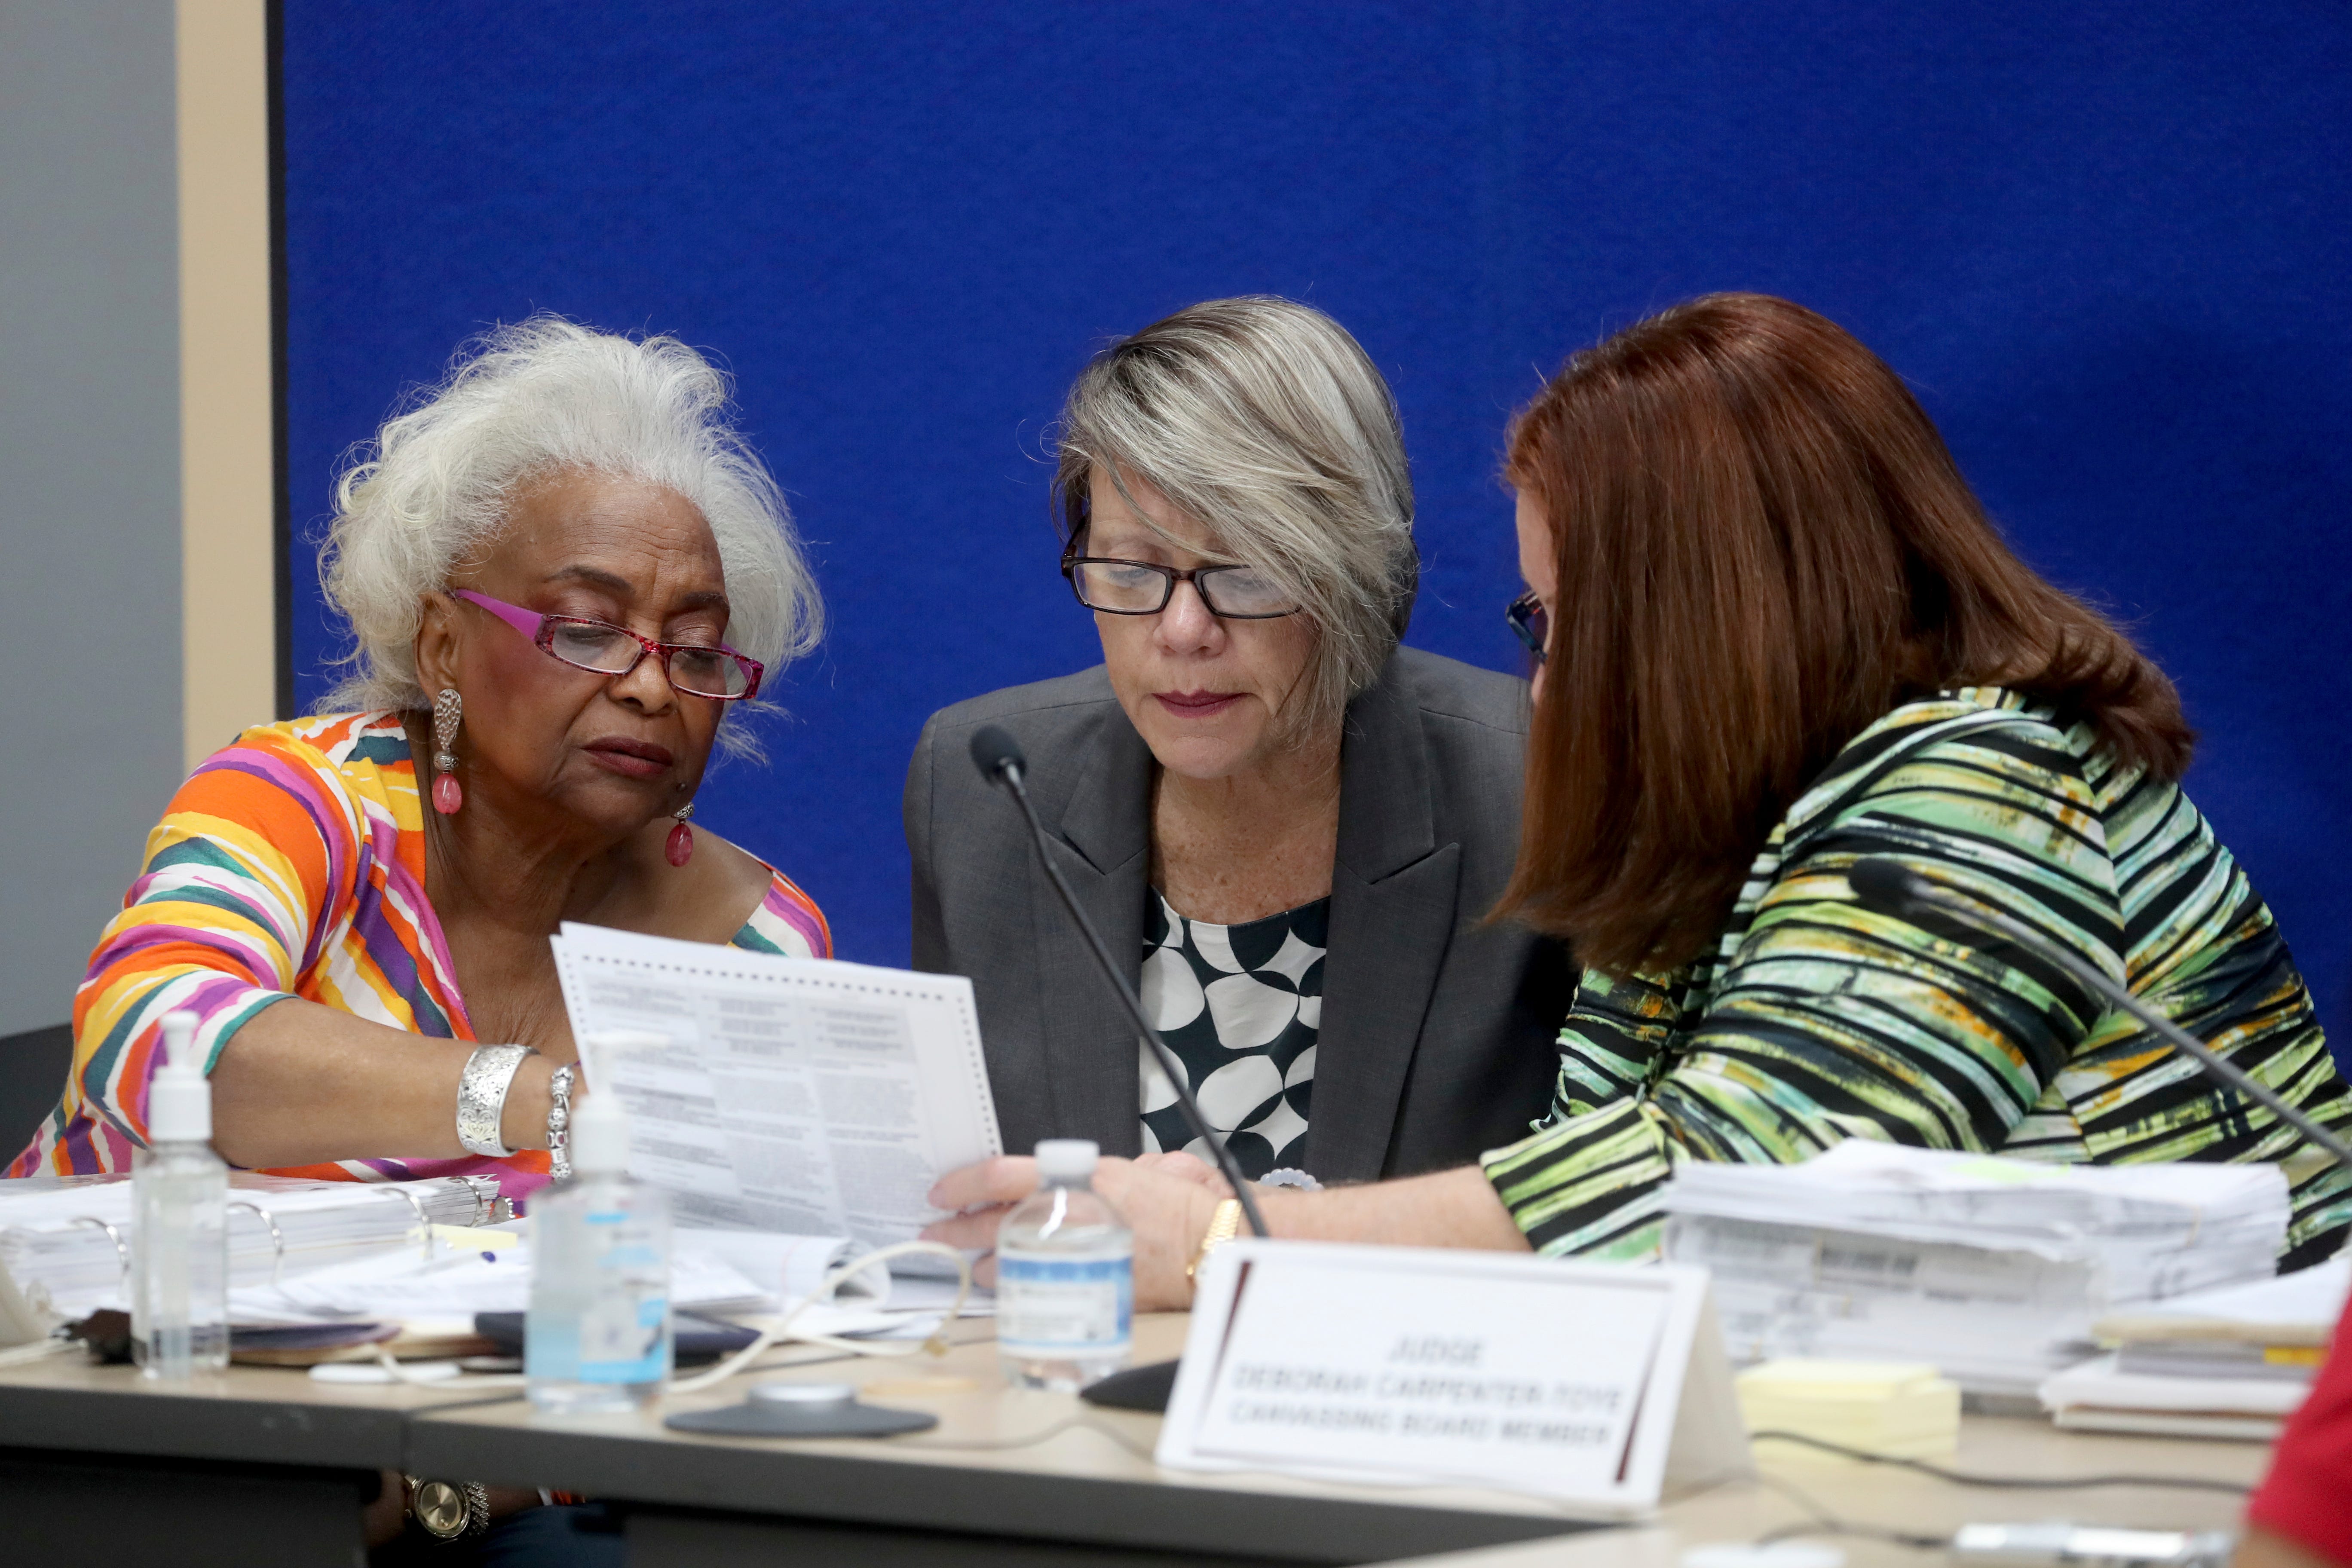 In 2018, then- Broward County Supervisor of Elections Brenda Snipes, Judge Betsy Benson, and Judge Brenda Carpenter-Toye of the Broward County canvassing board continue to count votes, Friday, Nov. 9, 2018, in Lauderhill, Fla.